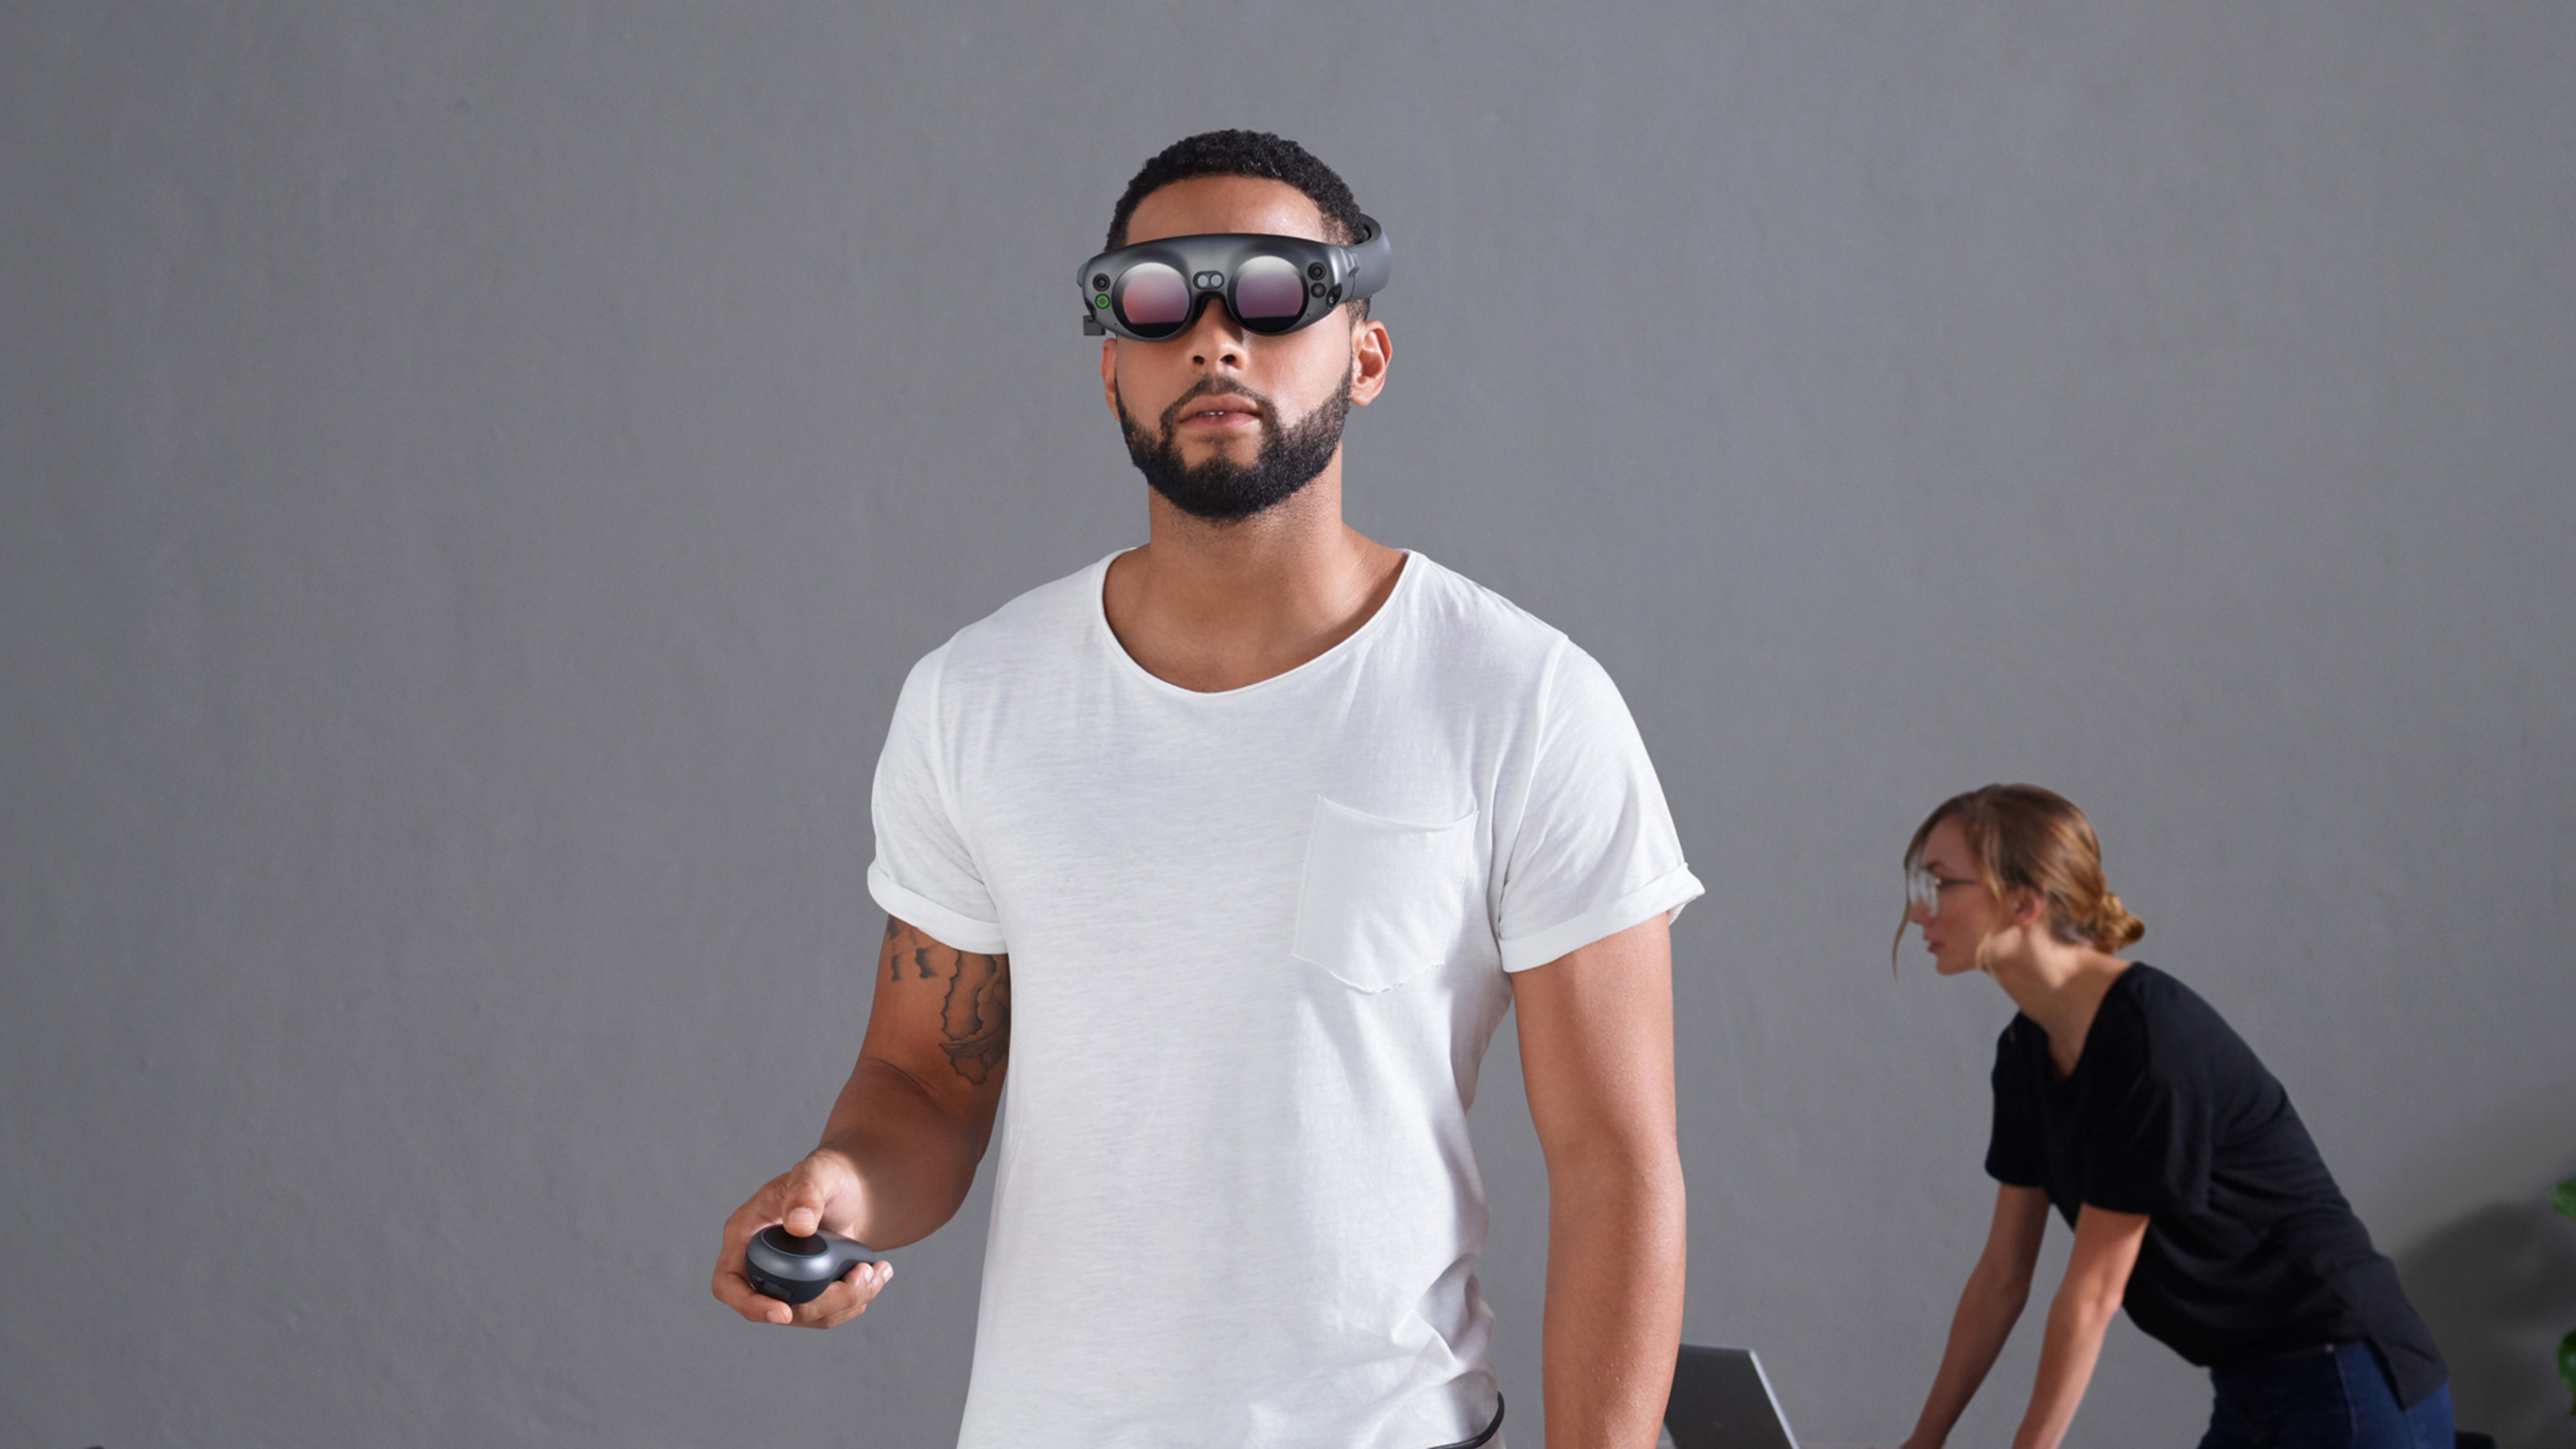 Believe it or not, Magic Leap says its headset will ship “this summer”